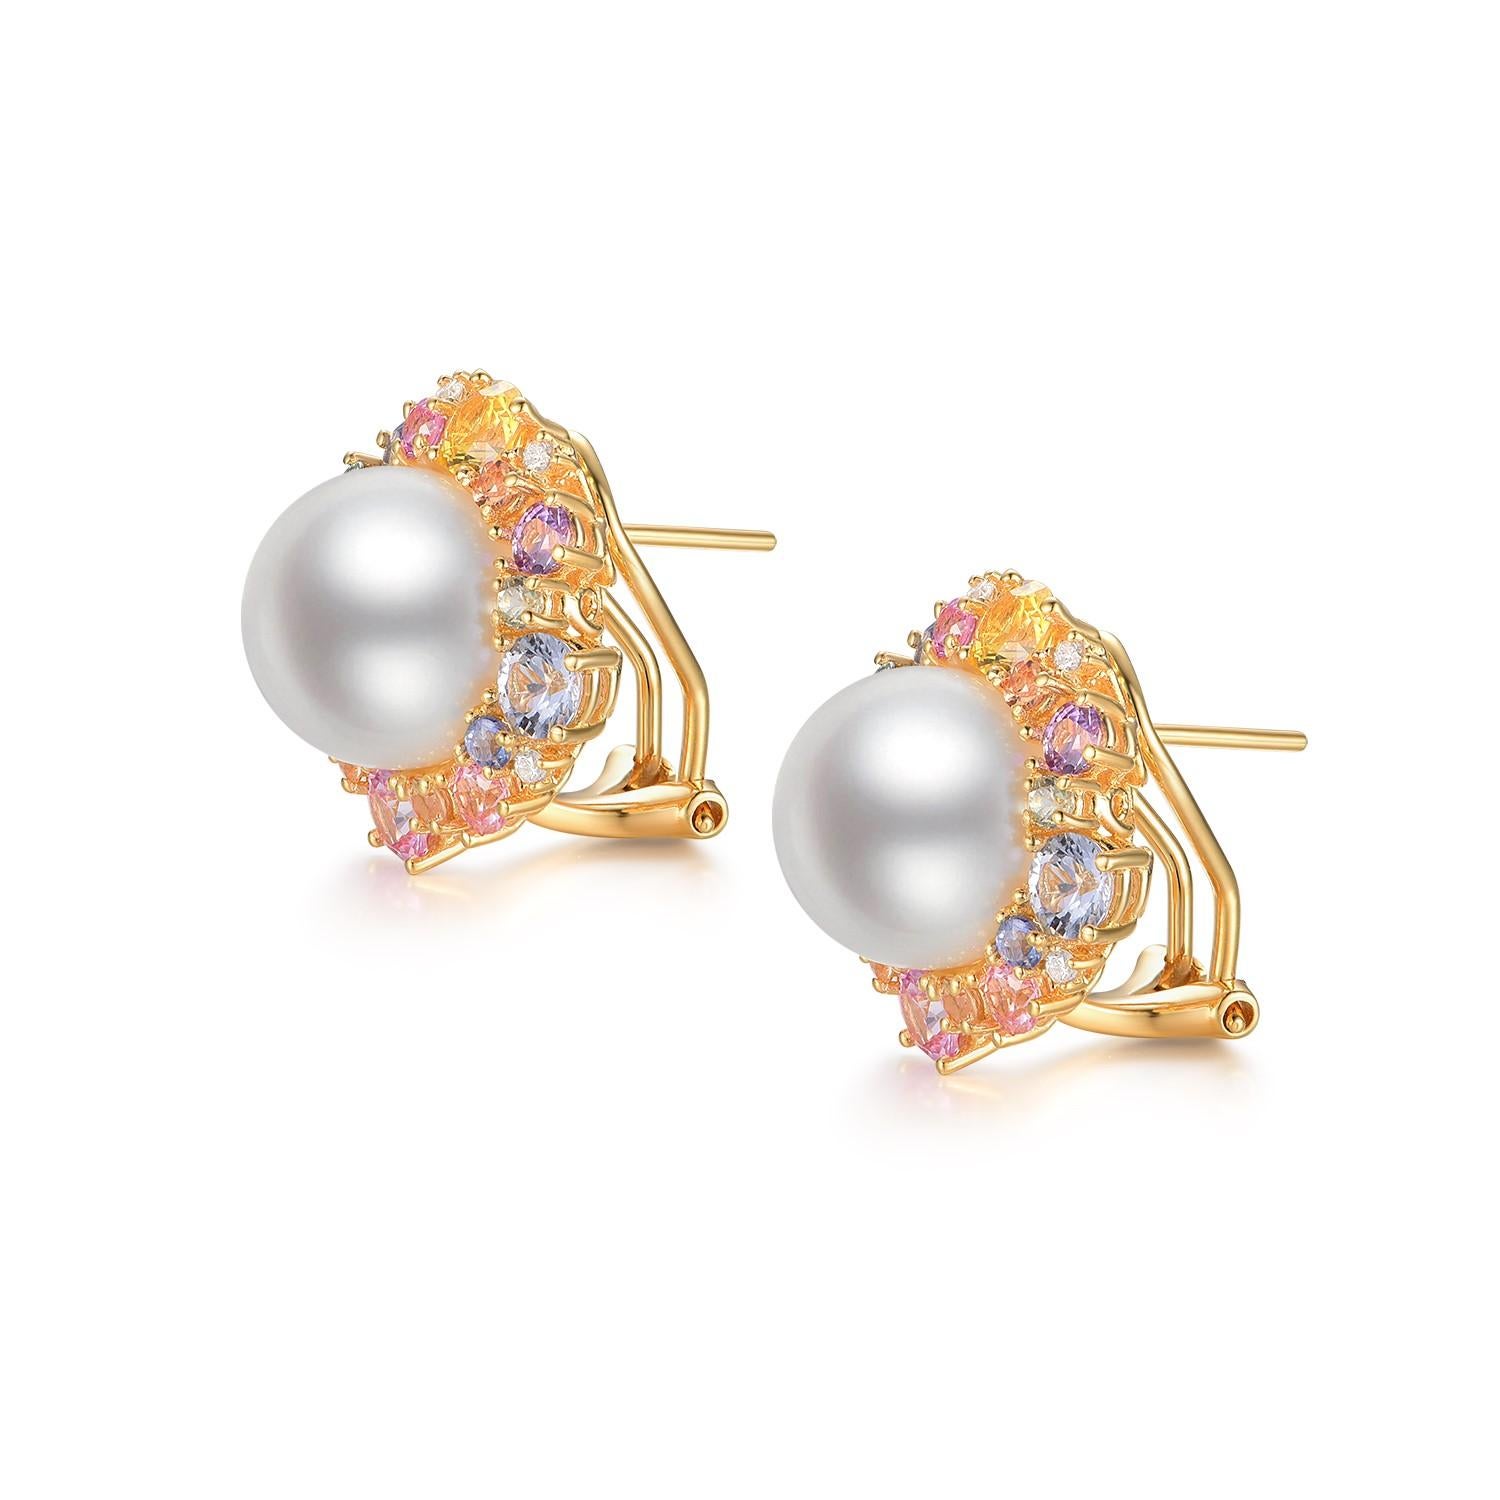 These stunning earrings celebrate the enchanting allure of South Sea pearls surrounded by a kaleidoscope of fancy sapphires, all set in a radiant 18K gold vermeil over sterling silver. Central to each earring is an 11mm South Sea pearl, chosen for